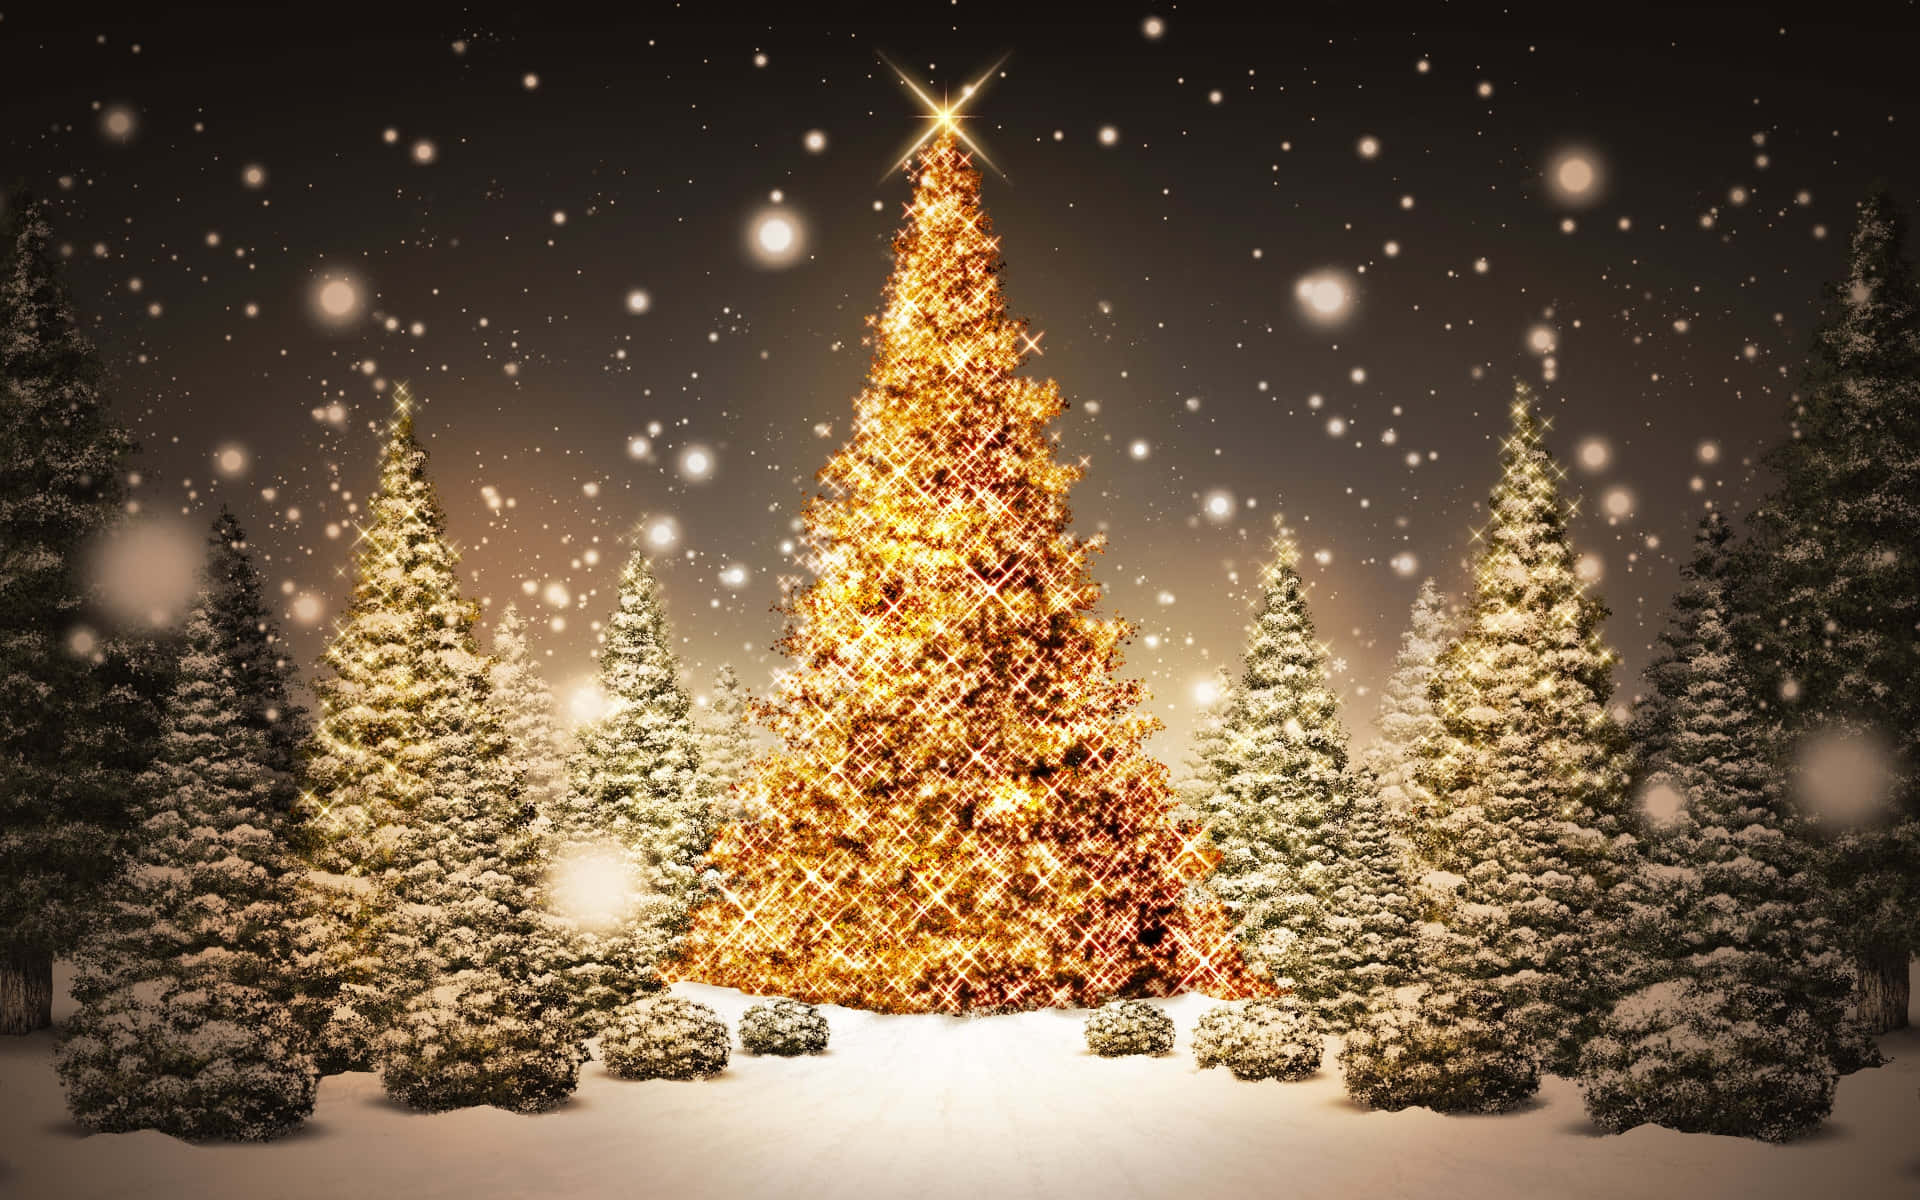 Mesmerizing 3D Christmas Scene with Snowy Trees and Glowing Ornaments Wallpaper